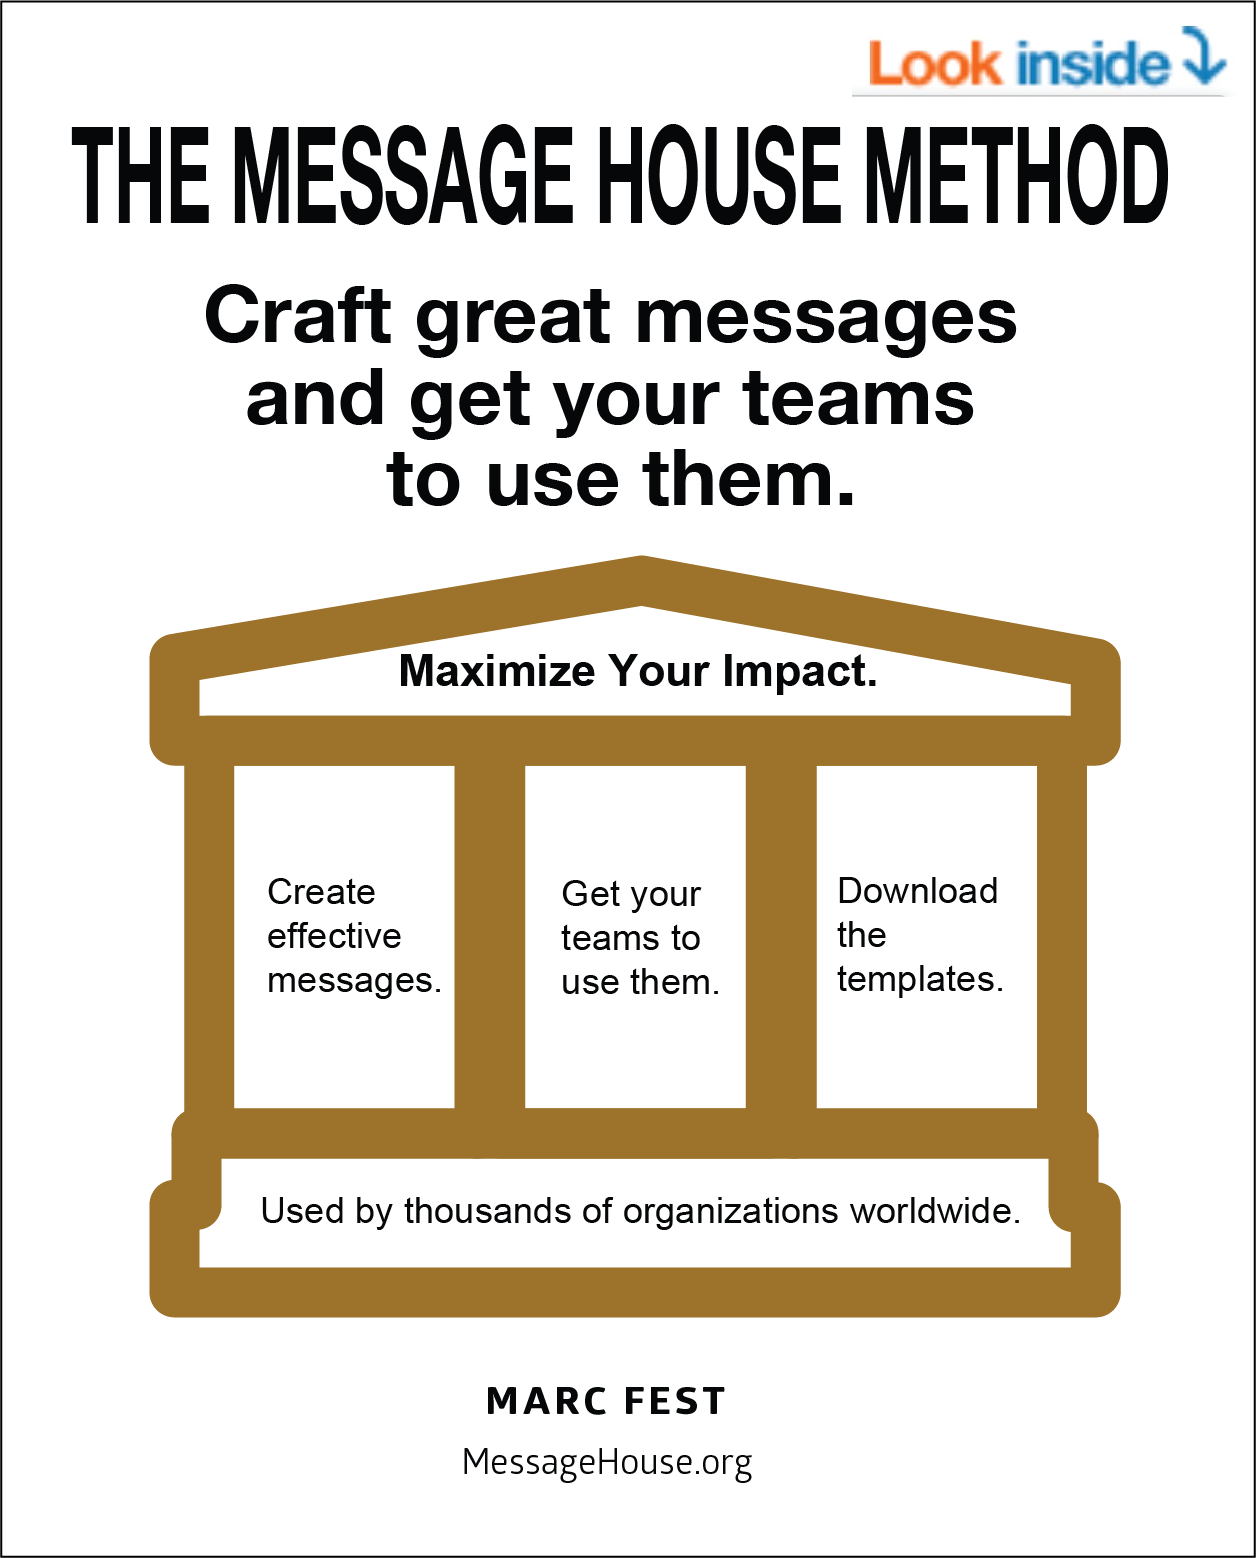 The Message House Method - image of book cover